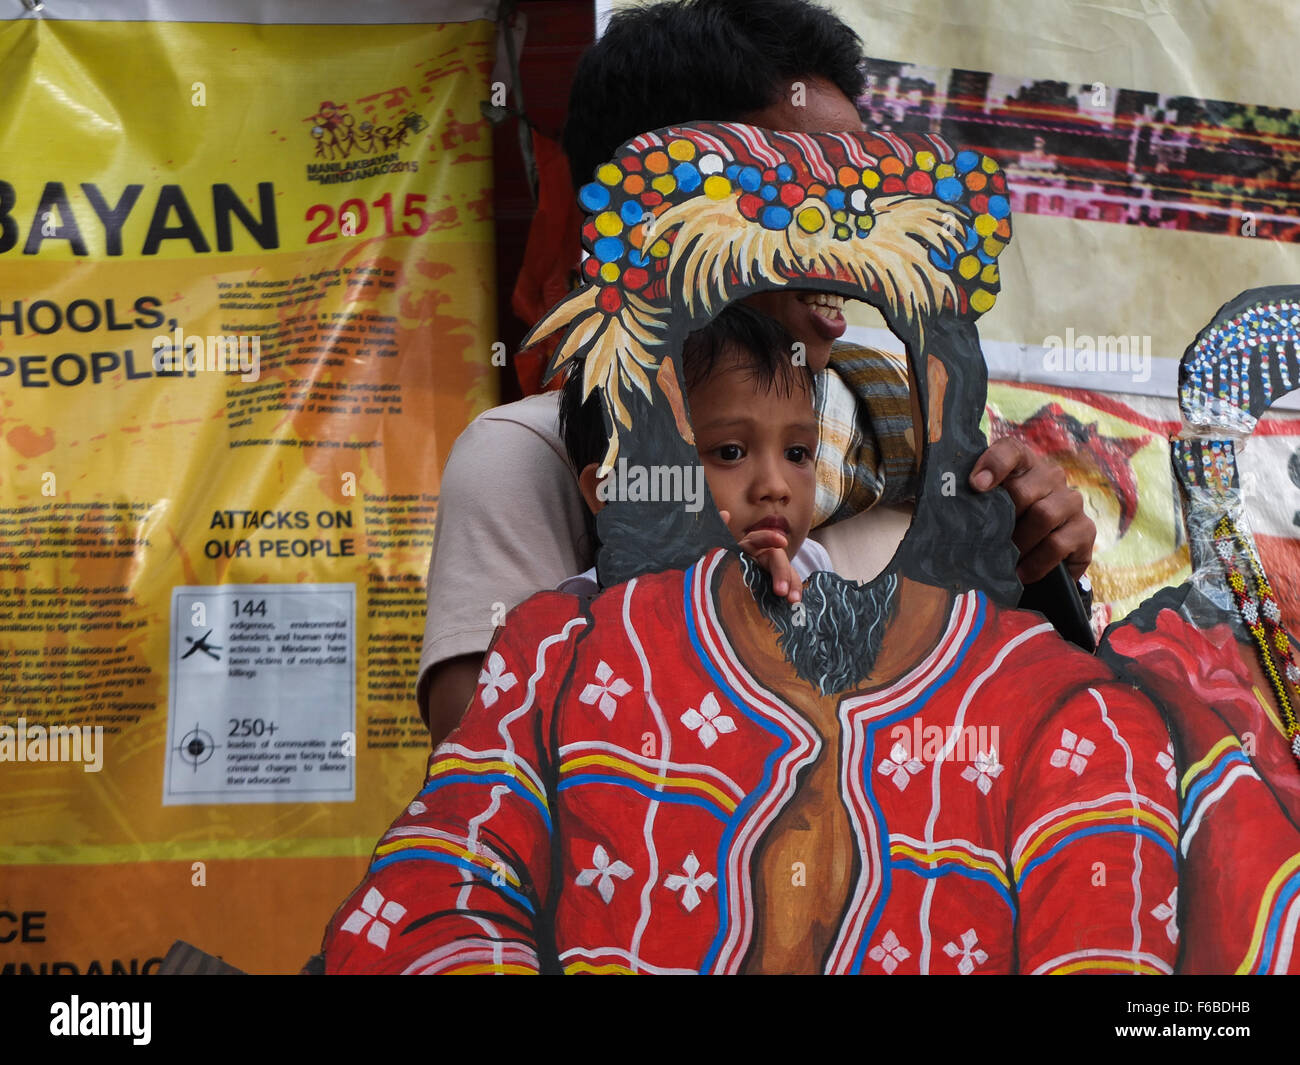 A boy peeping in the hole of a face of a Lumad life-size figure. The Lumad peoples are a group of indigenous people of the southern Philippines. It is a Cebuano term meaning 'native' or 'indigenous'. The term is short for Katawhang Lumad (literally 'indigenous peoples'), the autonym officially adopted by the delegates of the Lumad Mindanao Peoples Federation (LMPF) founding assembly on 26 June 1986 at the Guadalupe Formation Center, Balindog, Kidapawan, Cotabato, Philippines. It is the self-ascription and collective identity of the indigenous peoples of Mindanao. (Photo by Josefiel Rivera/Pa Stock Photo